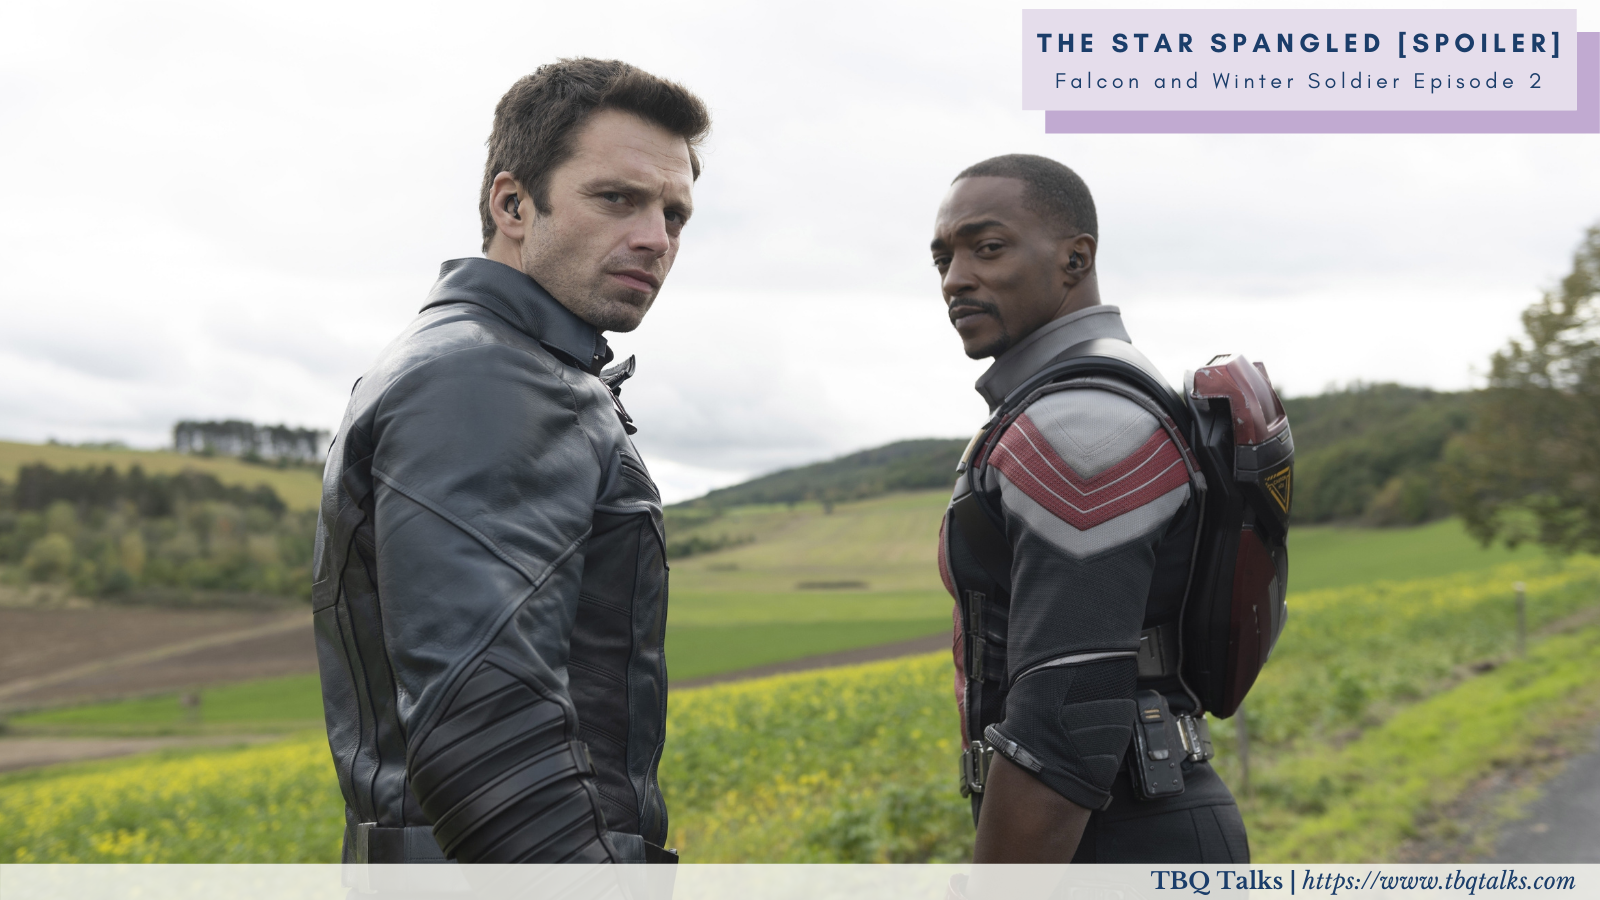 The Falcon and the Winter Soldier Episode 2 Analysis: The Star Spangled [SPOILER]